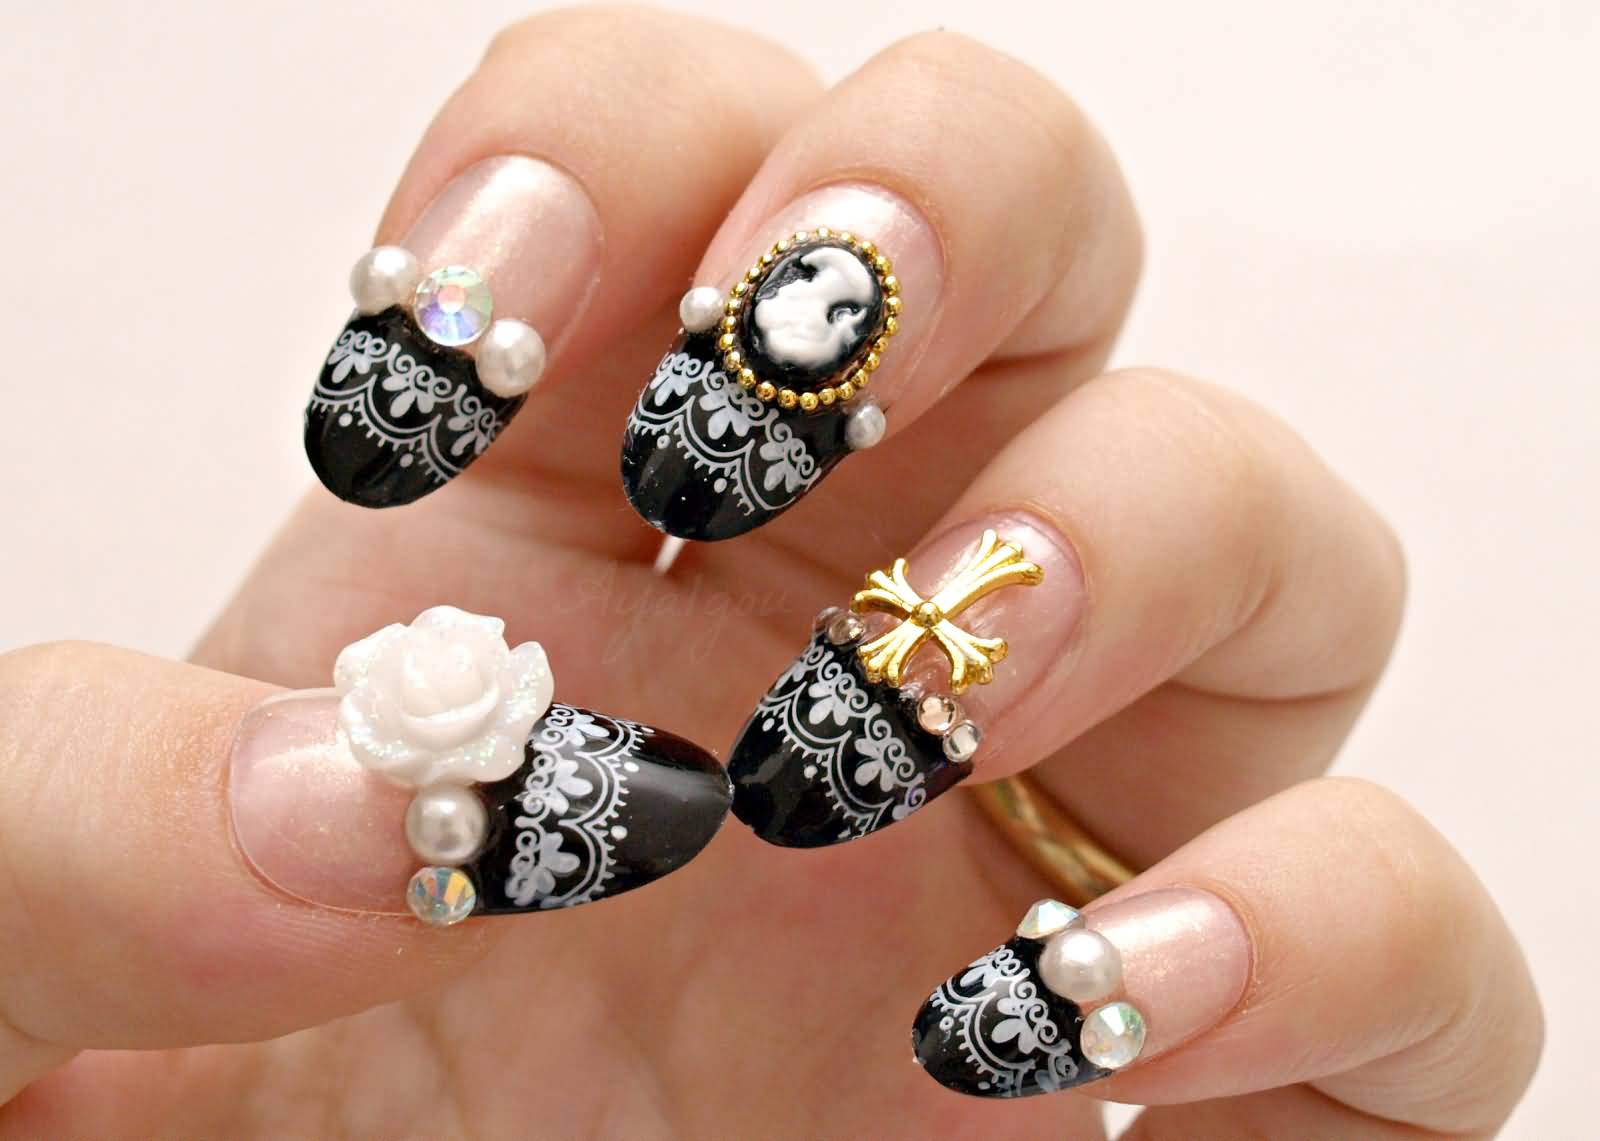 Black And White Lace Design With 3D Rose Flower And Golden Cross Bling Nail Art